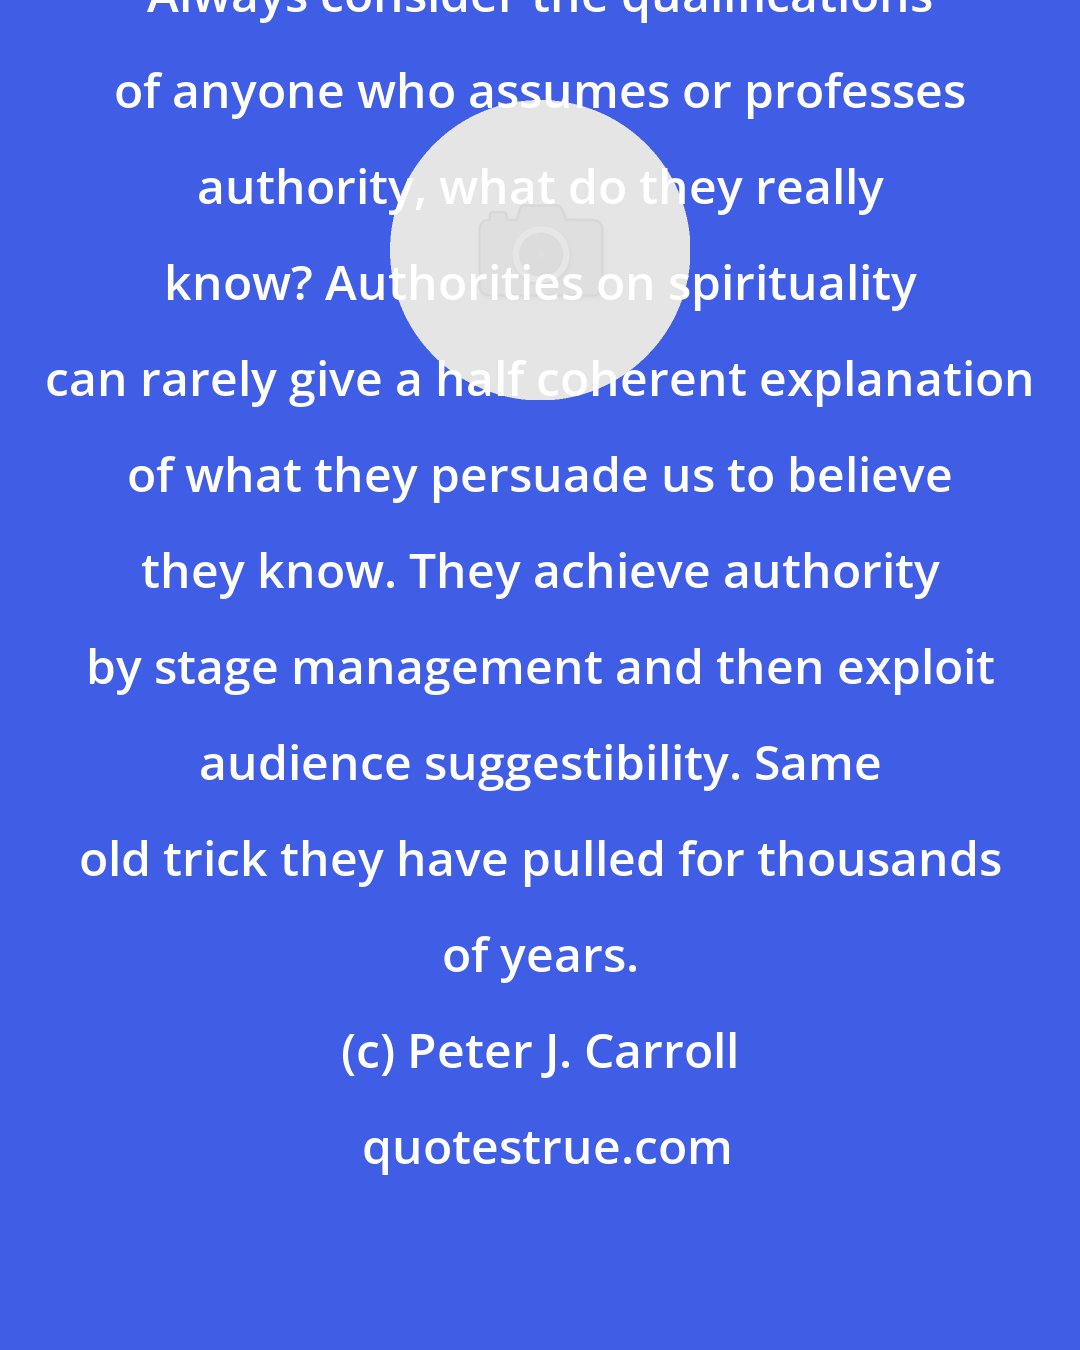 Peter J. Carroll: Always consider the qualifications of anyone who assumes or professes authority, what do they really know? Authorities on spirituality can rarely give a half coherent explanation of what they persuade us to believe they know. They achieve authority by stage management and then exploit audience suggestibility. Same old trick they have pulled for thousands of years.